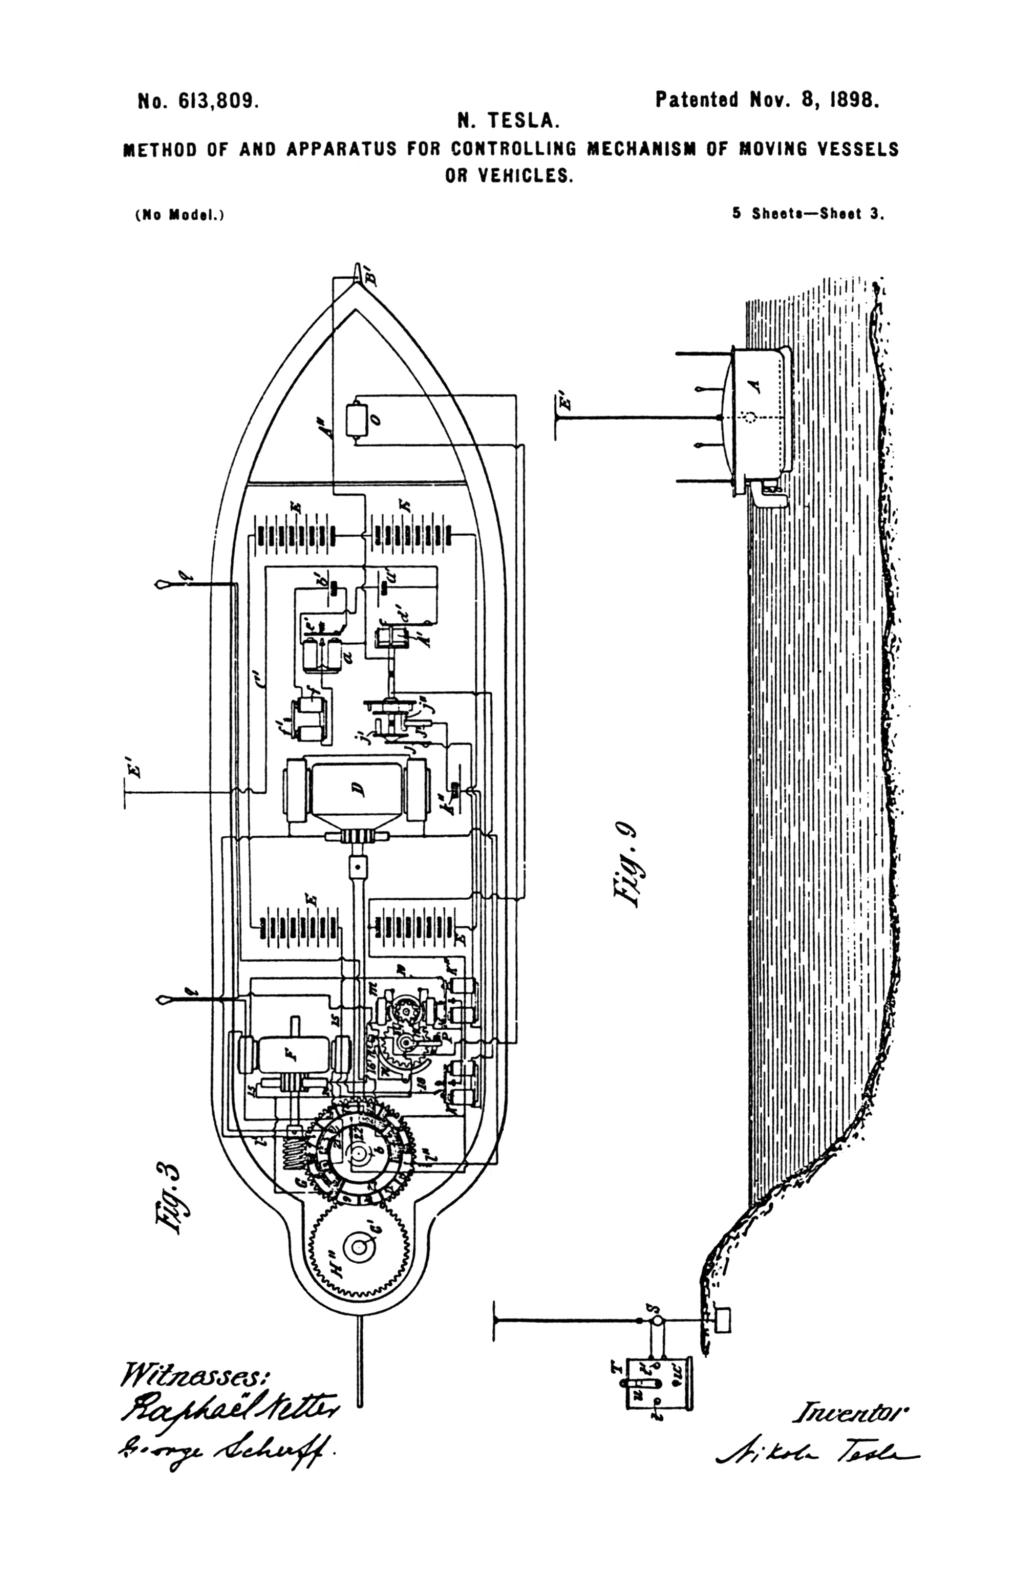 Nikola Tesla U.S. Patent 613,809 - Method of and Apparatus for Controlling Mechanism of Moving Vehicle or Vehicles - Image 3